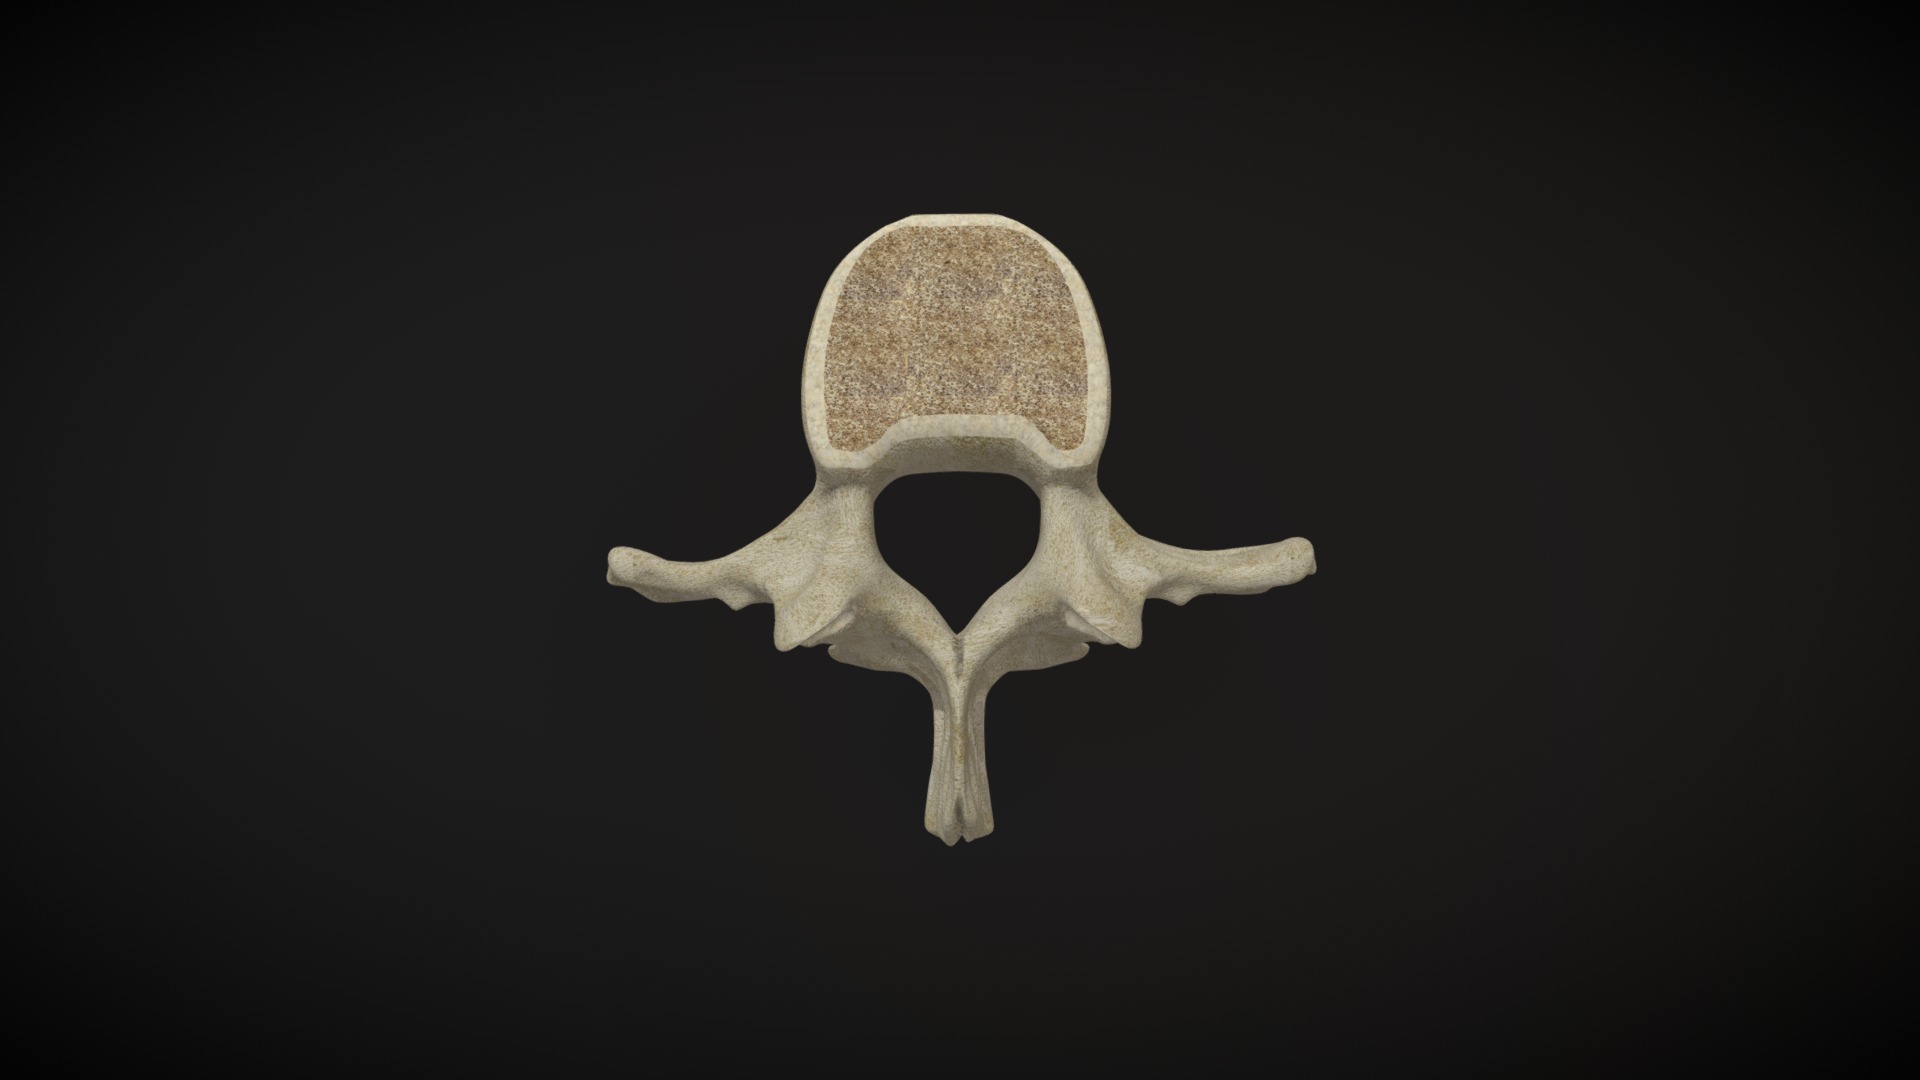 3D model Vertebra Lumbar / Lumbar Vertebrae - This is a 3D model of the Vertebra Lumbar / Lumbar Vertebrae. The 3D model is about a skull with a black background.